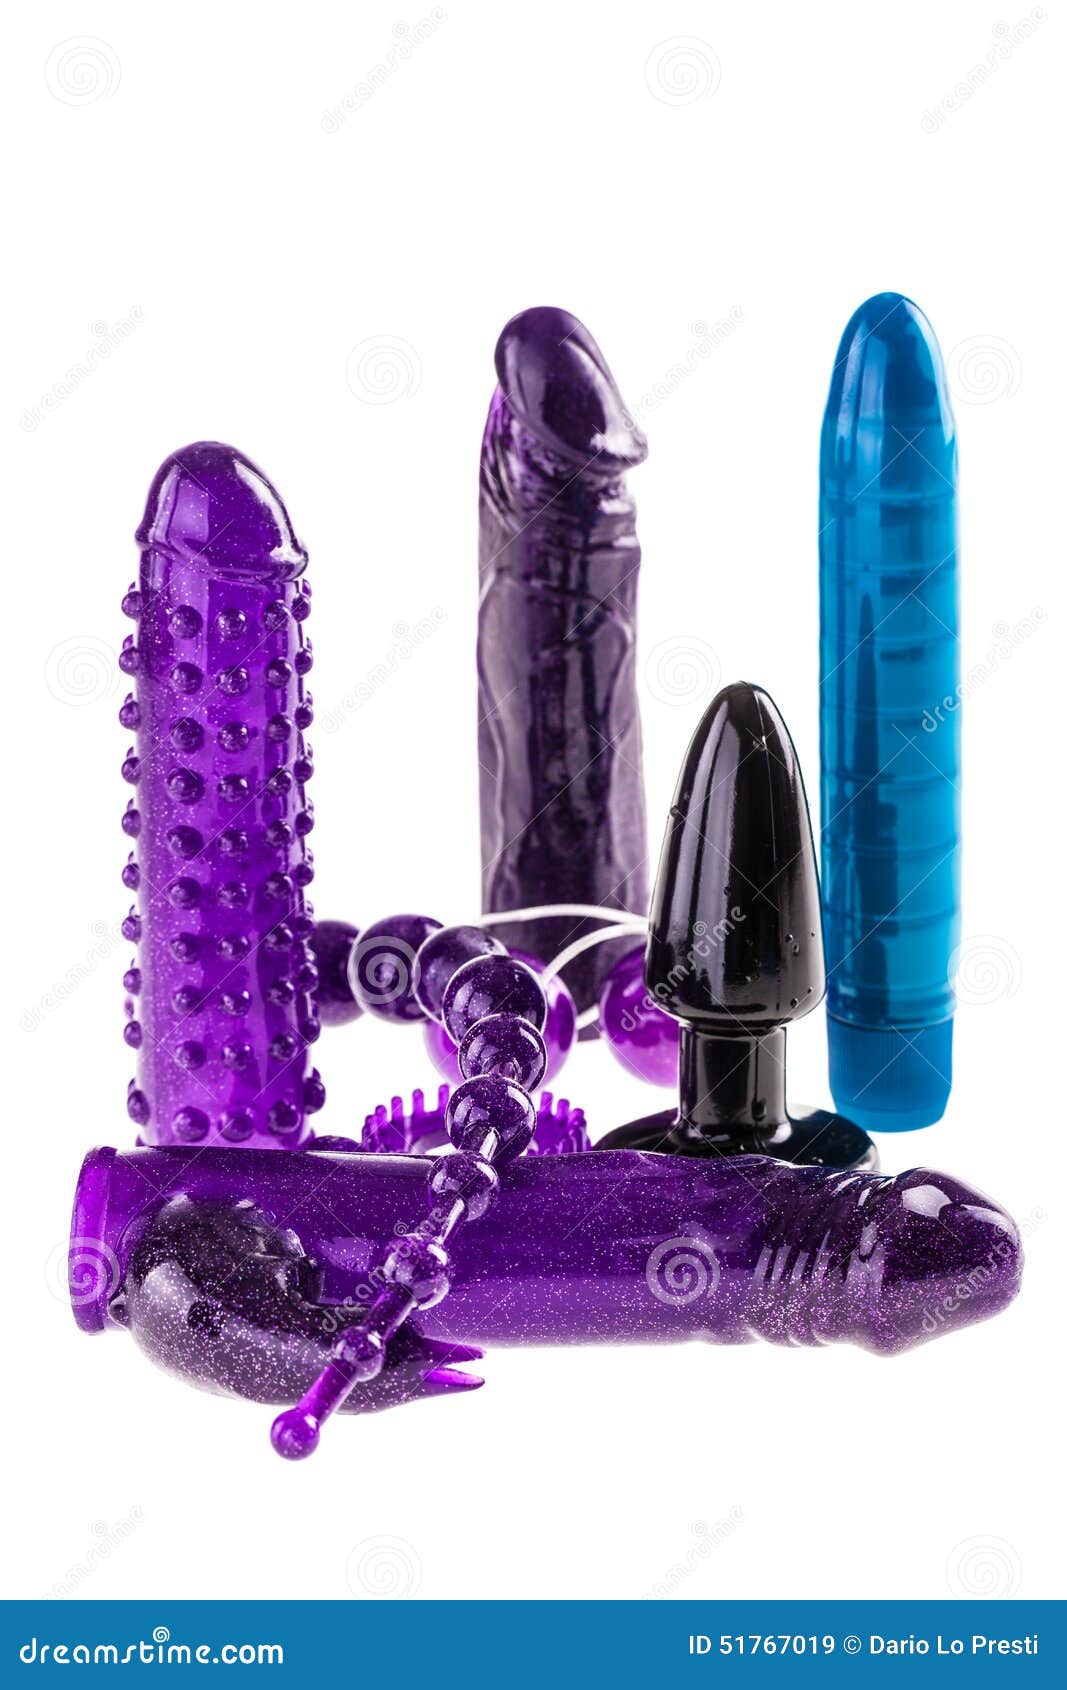 abhishek mestry recommends Love Beads Sex Toy